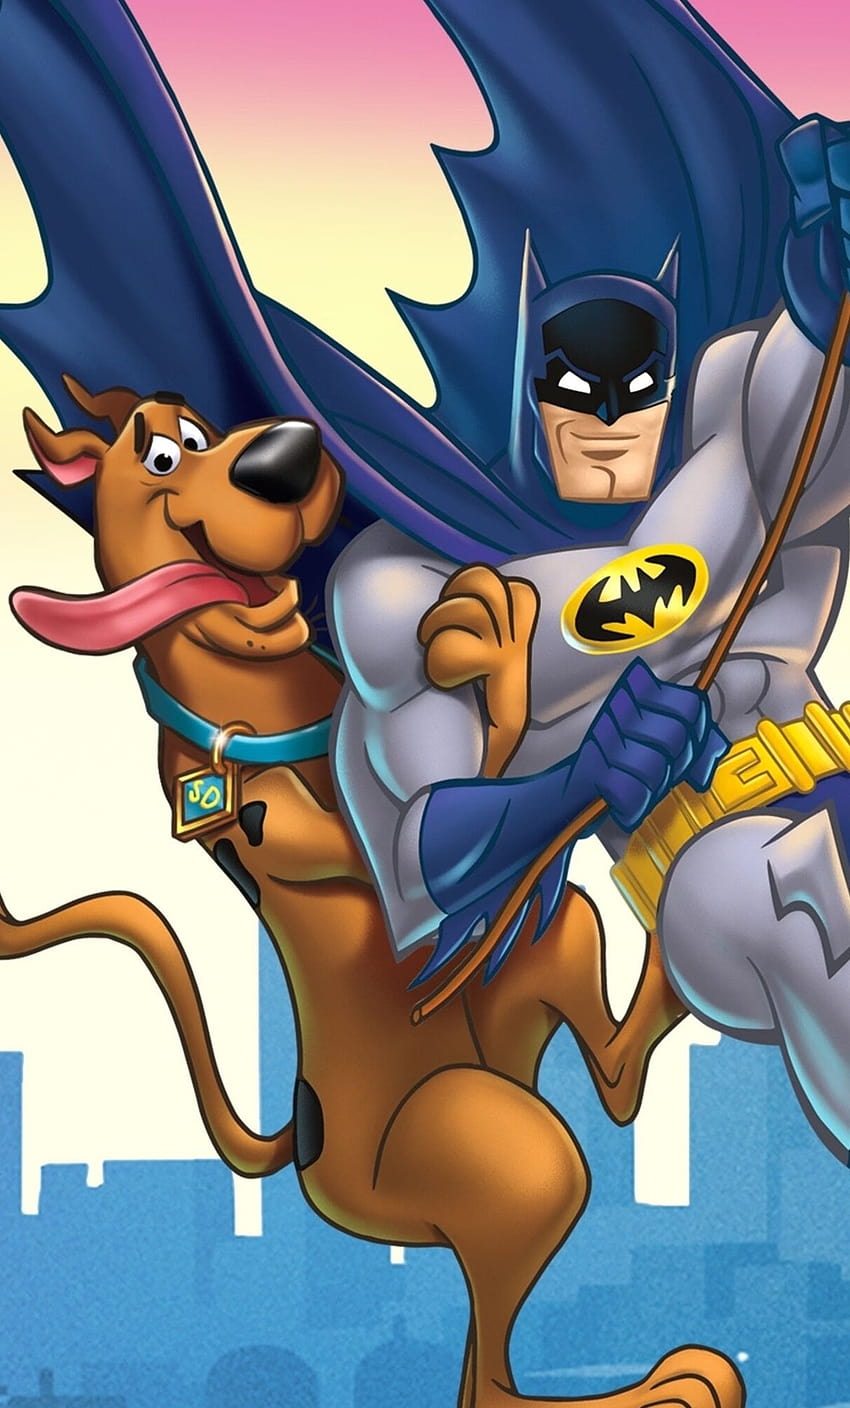 1280x2120 Scooby Doo And Batman The Brave And The Bold iPhone , Backgrounds, and, scooby doo batman the brave and the bold HD phone wallpaper